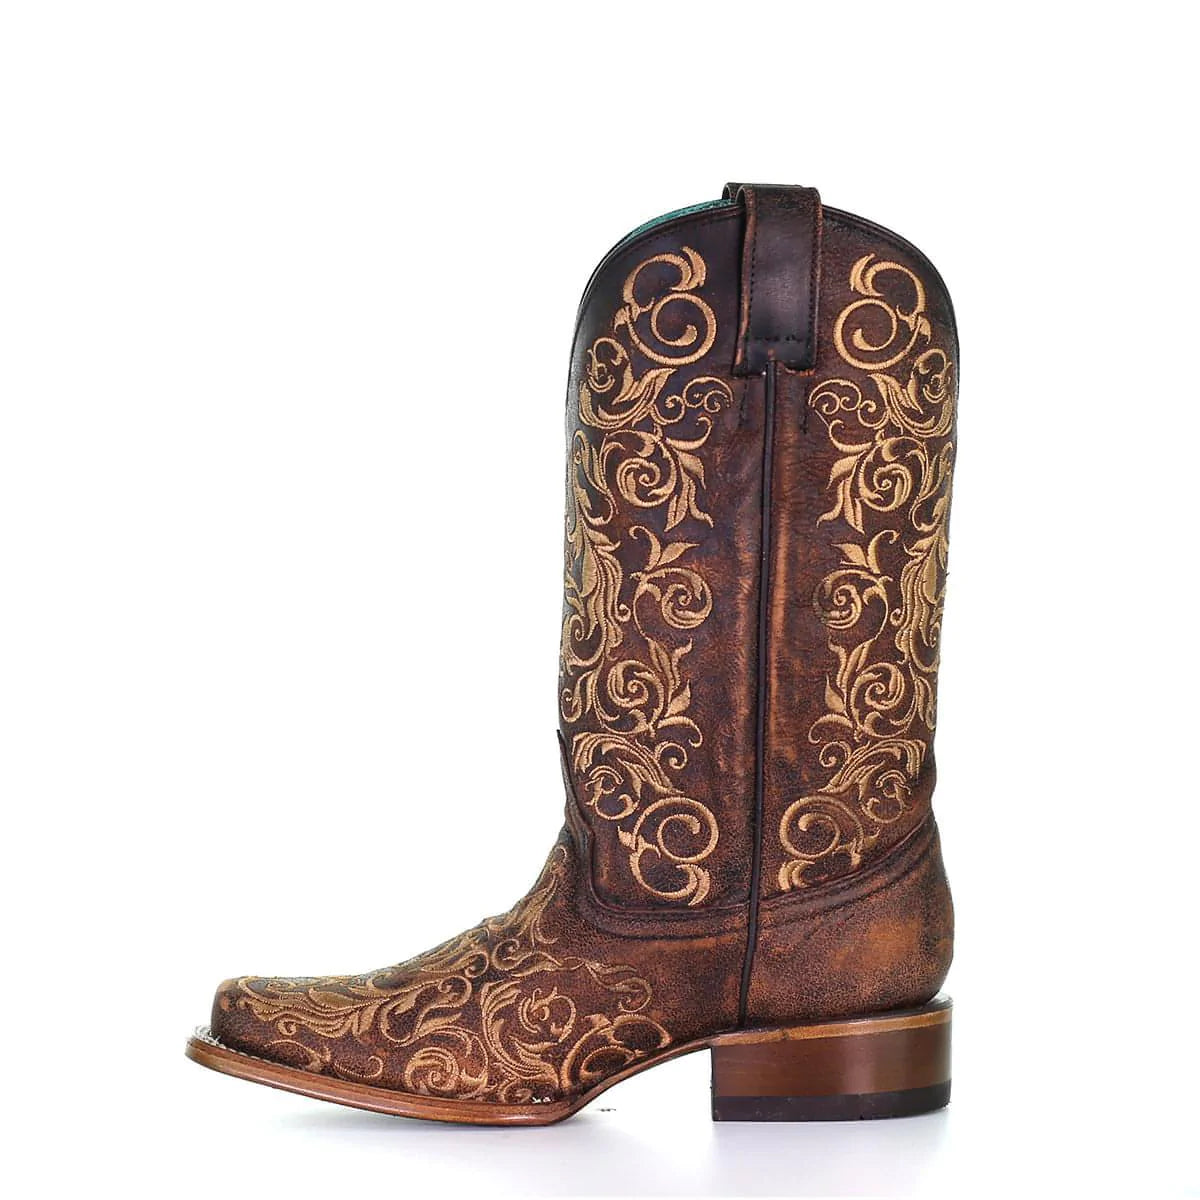 The Kylie Corral Boots